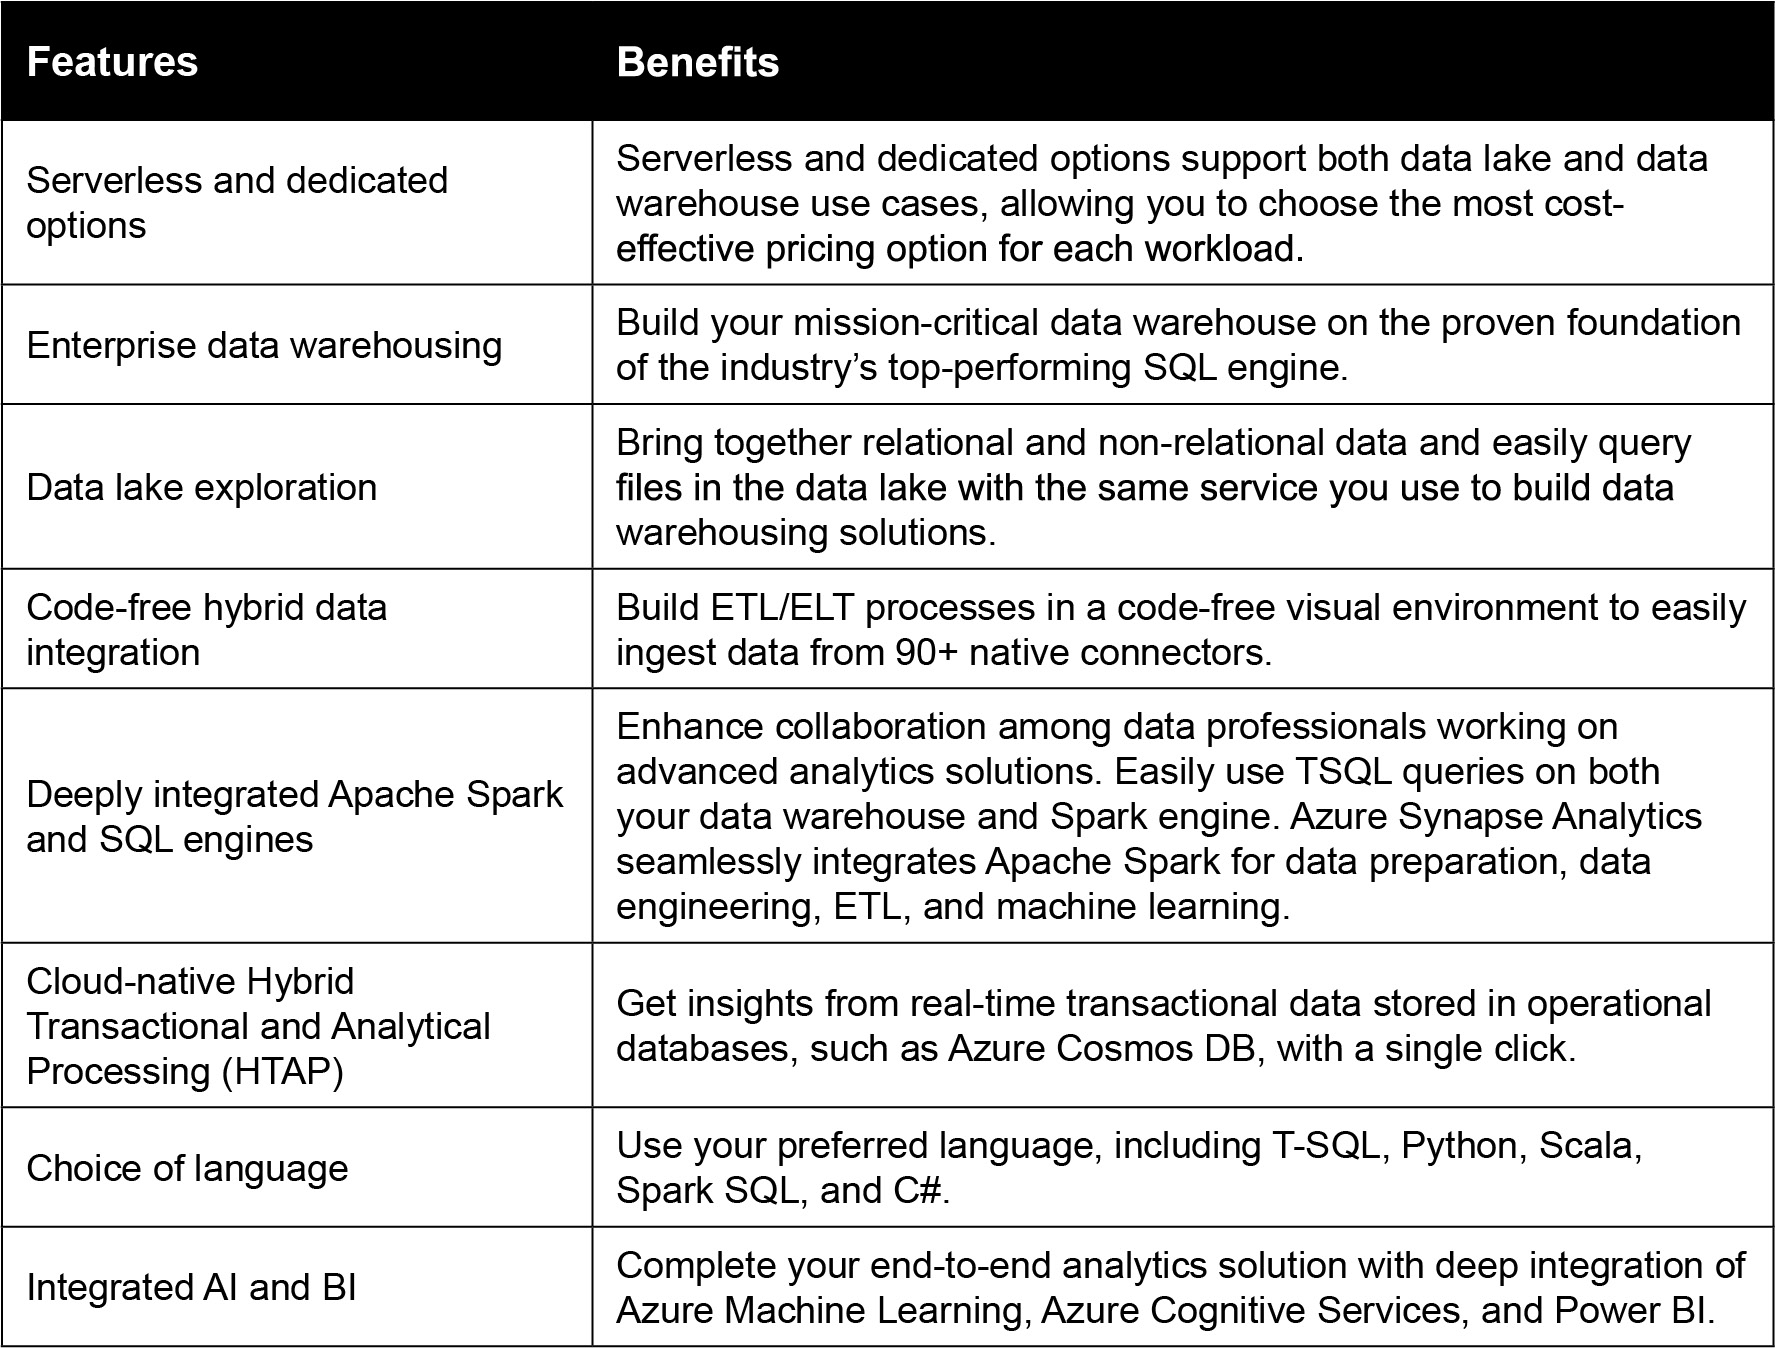 Features and benefits by Azure SynapseAnalytics